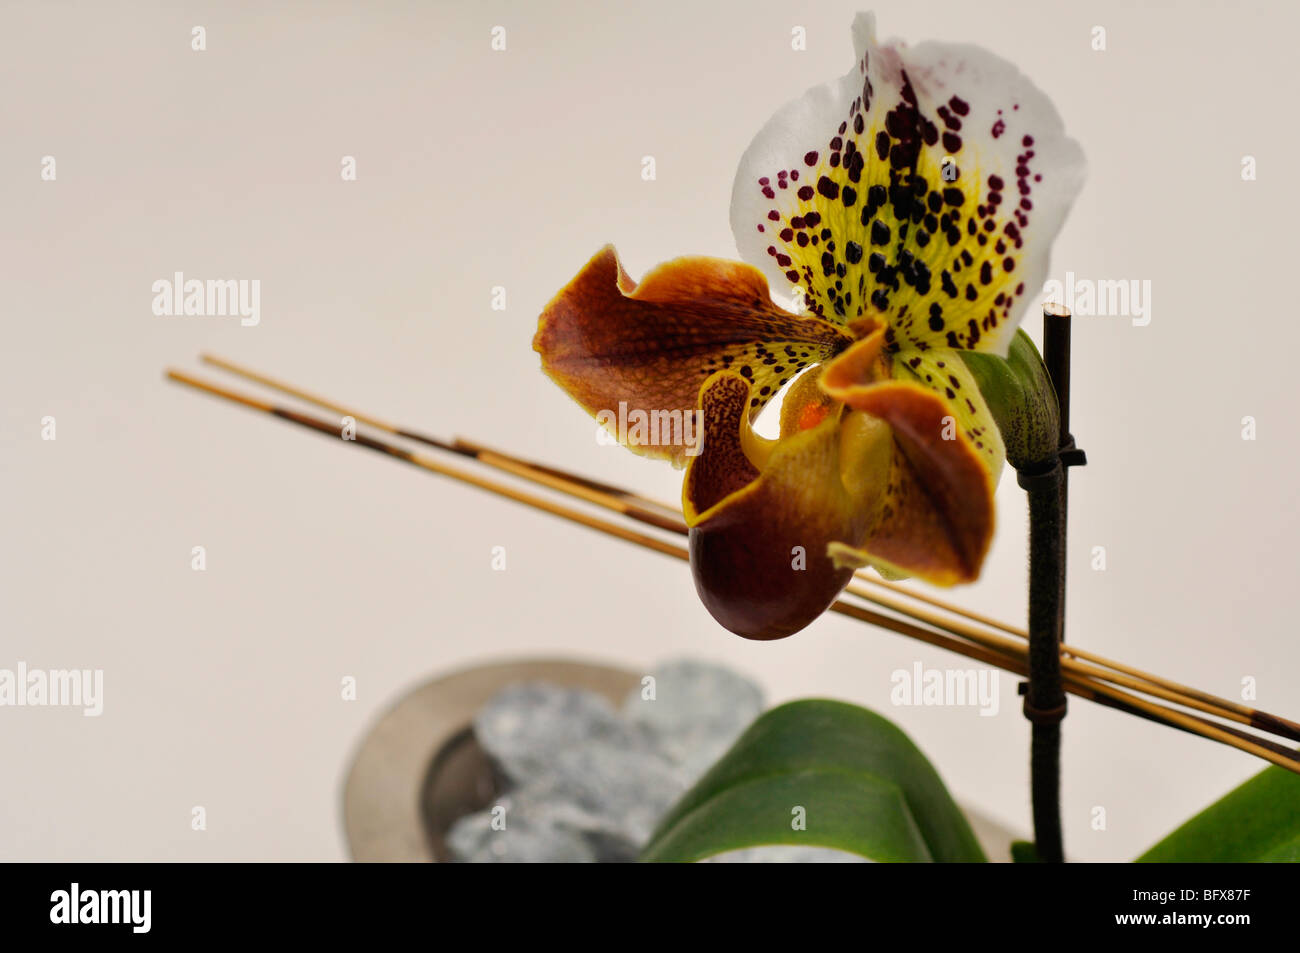 Brown Lady's lady slipper orchid (Paphiopedilum) Stock Photo